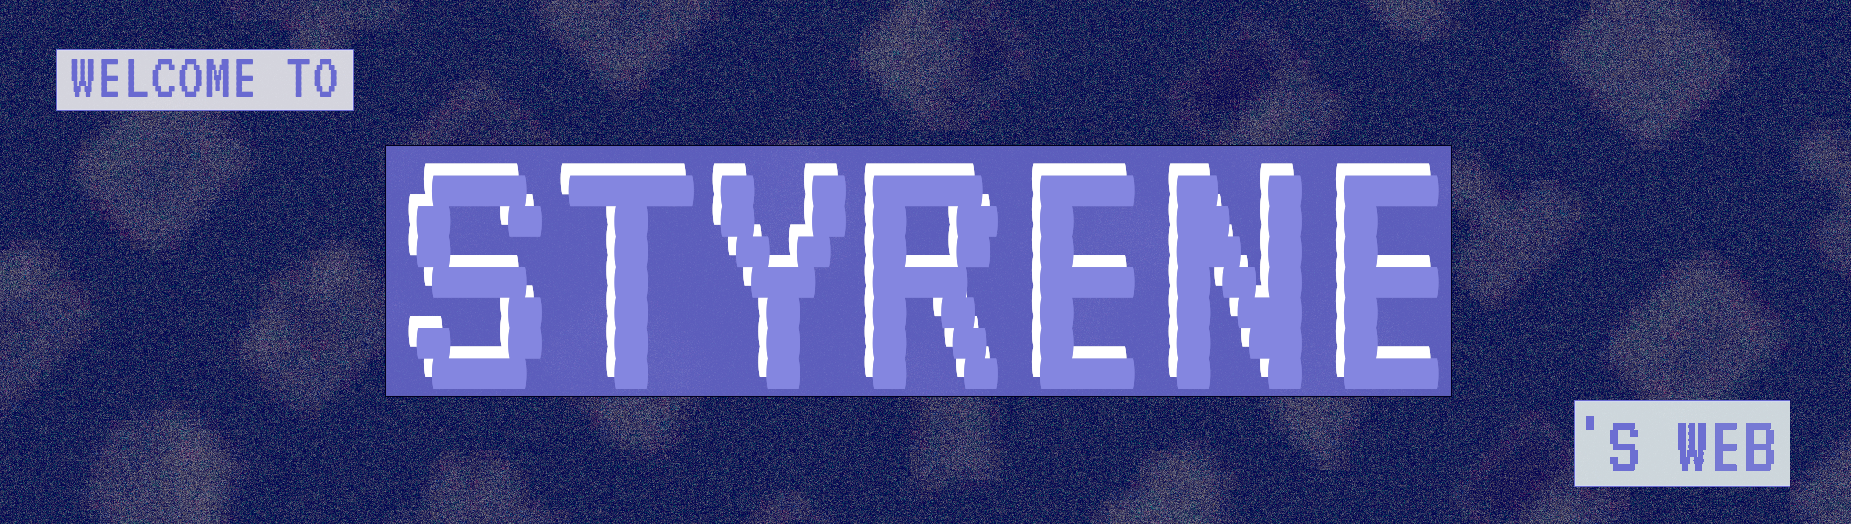 Welcome to Styrene's web